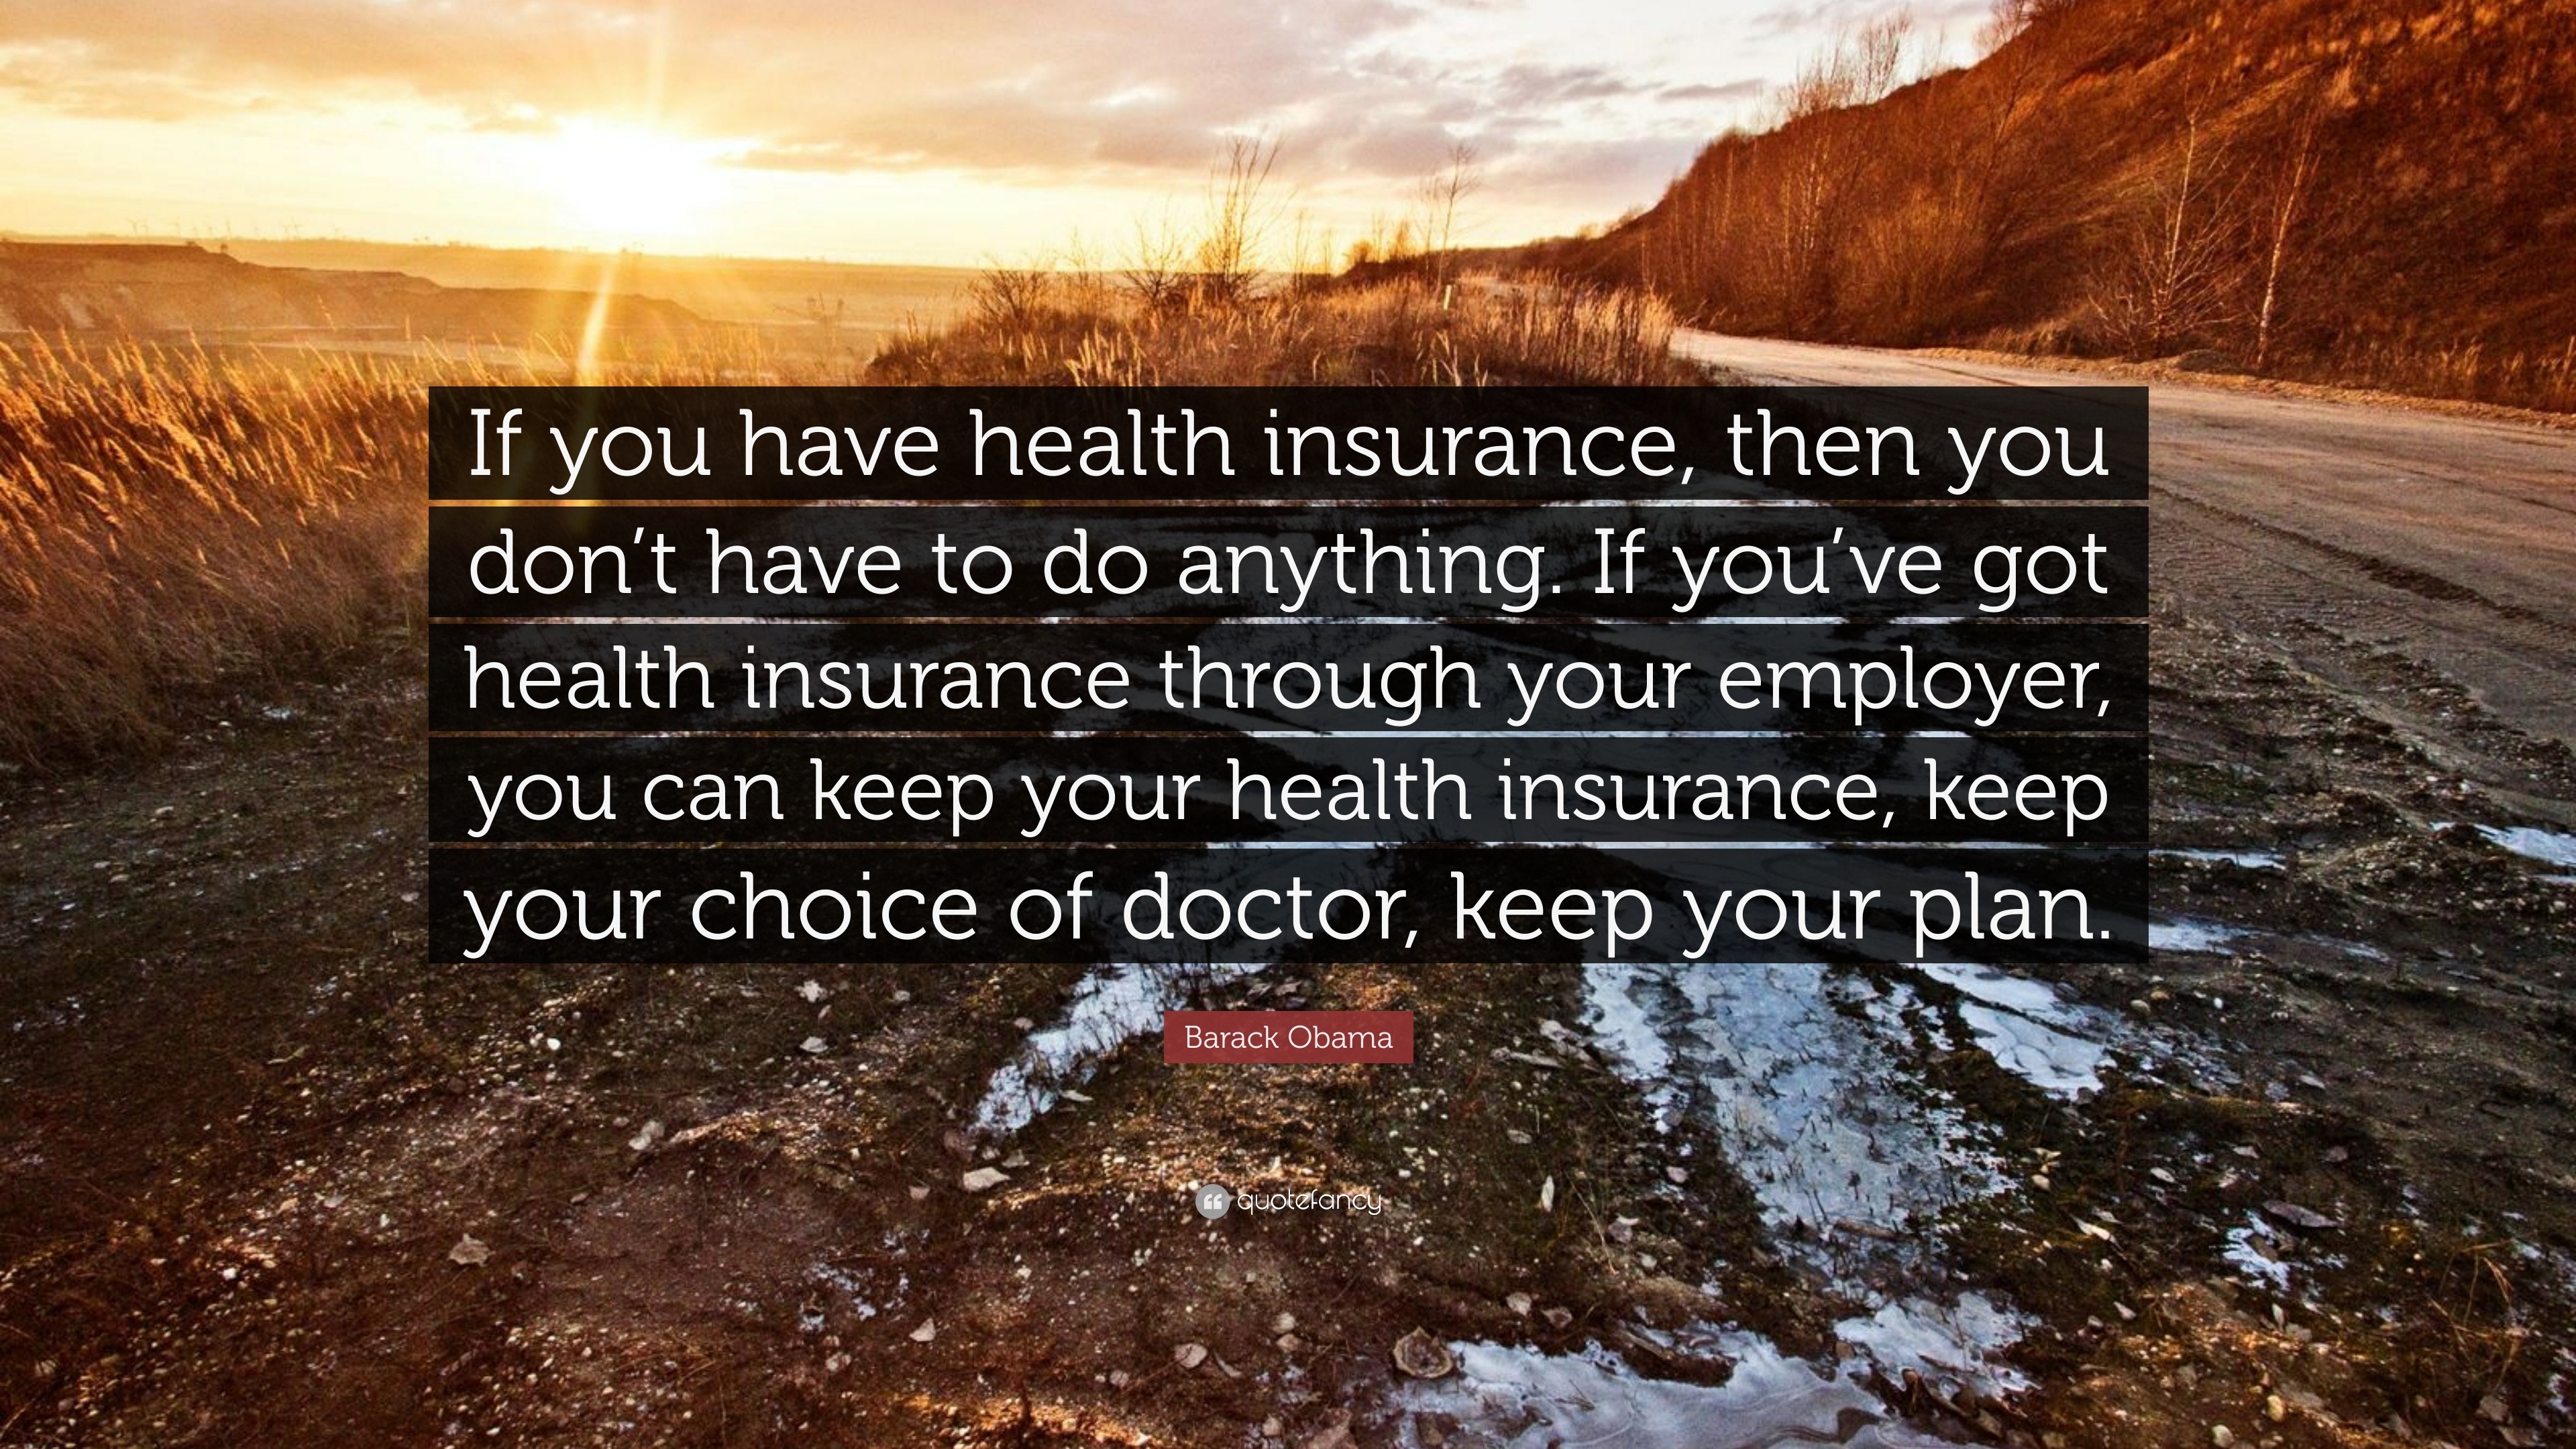 Barack Obama Quote: "If you have health insurance, then ...